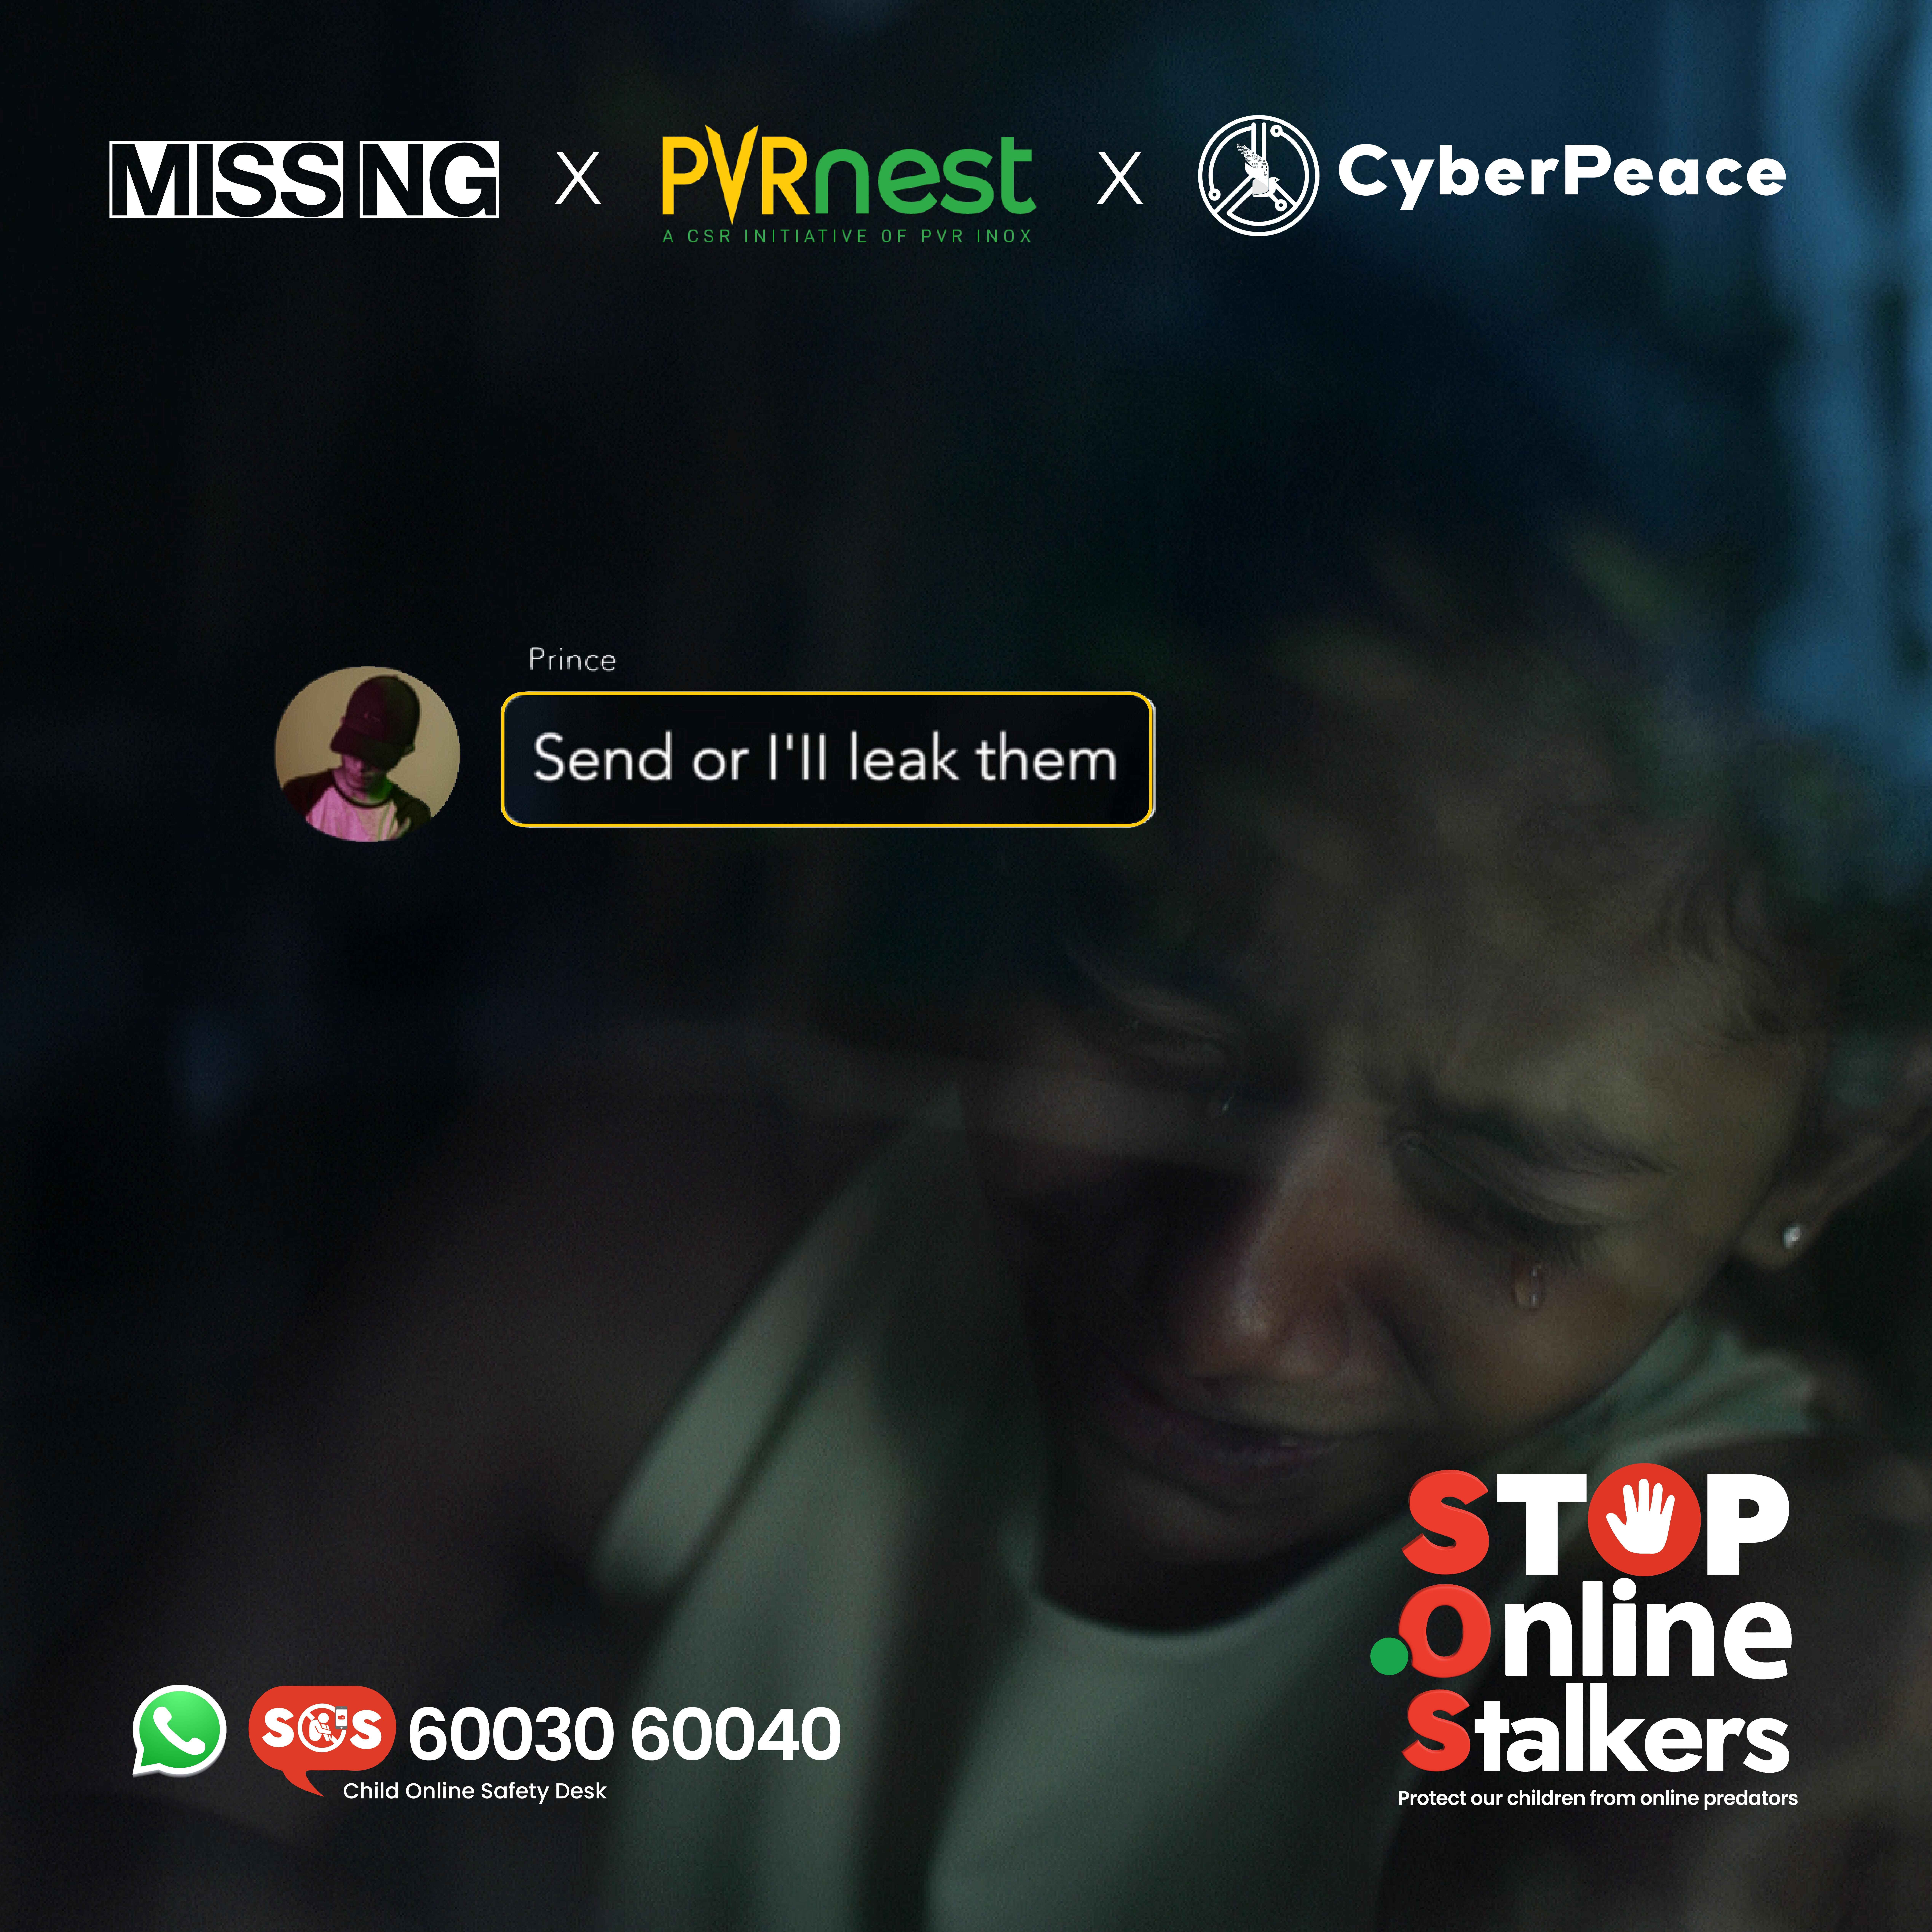 #SOS “Stop Online Stalkers” Campaign launched by Missing Link Trust, CyberPeace and PVR INOX Cinemas